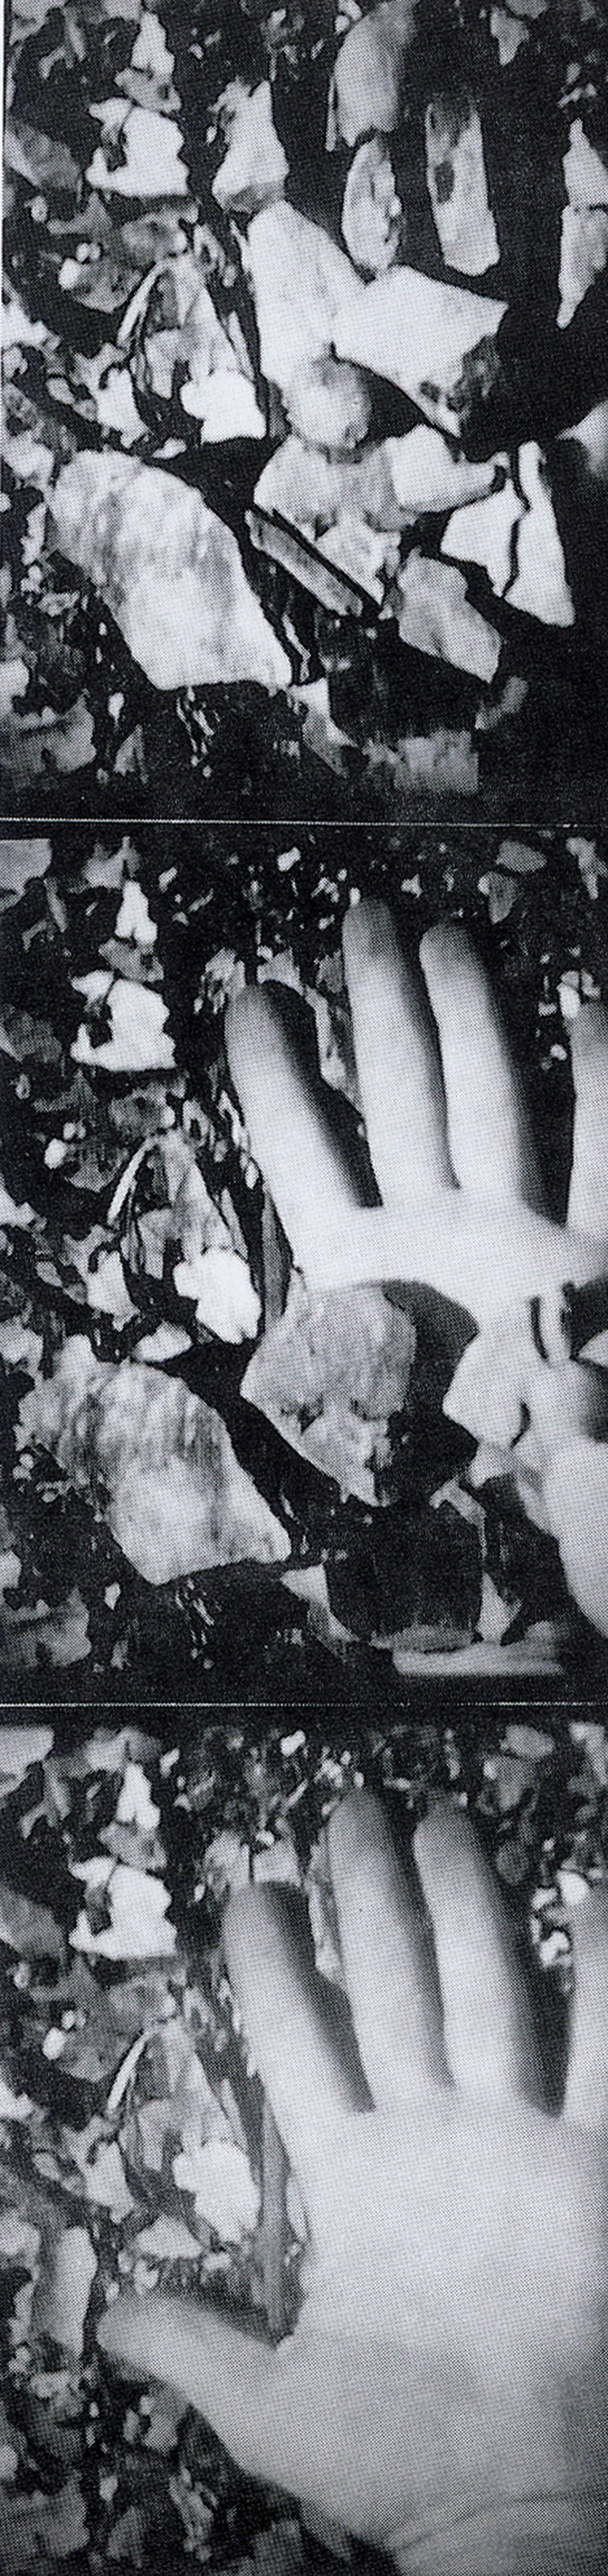 Rocked Hand, 1970
Photography